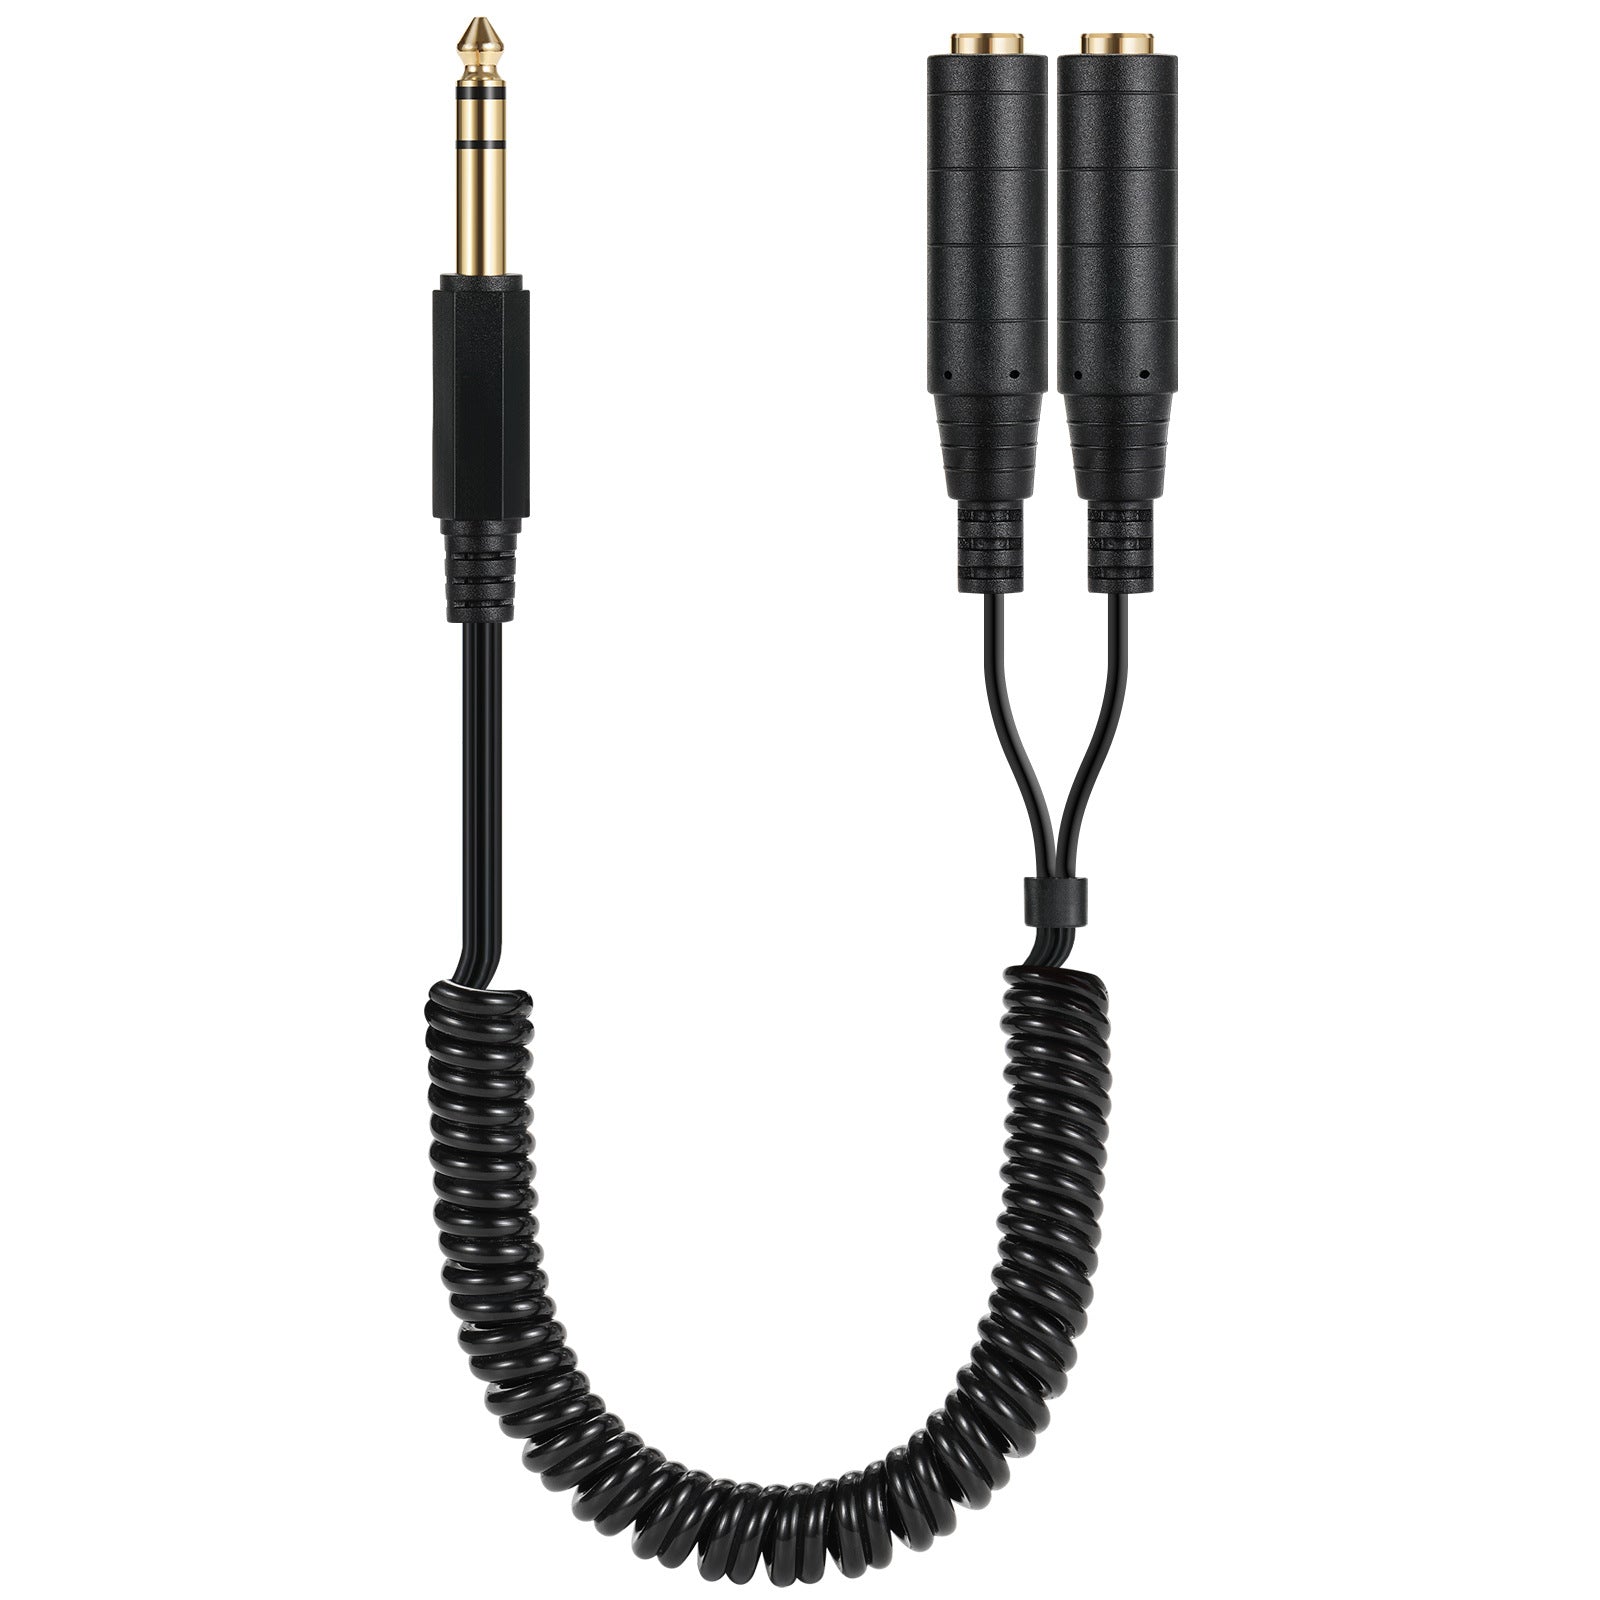 How 1/4 inch Audio Cables Work